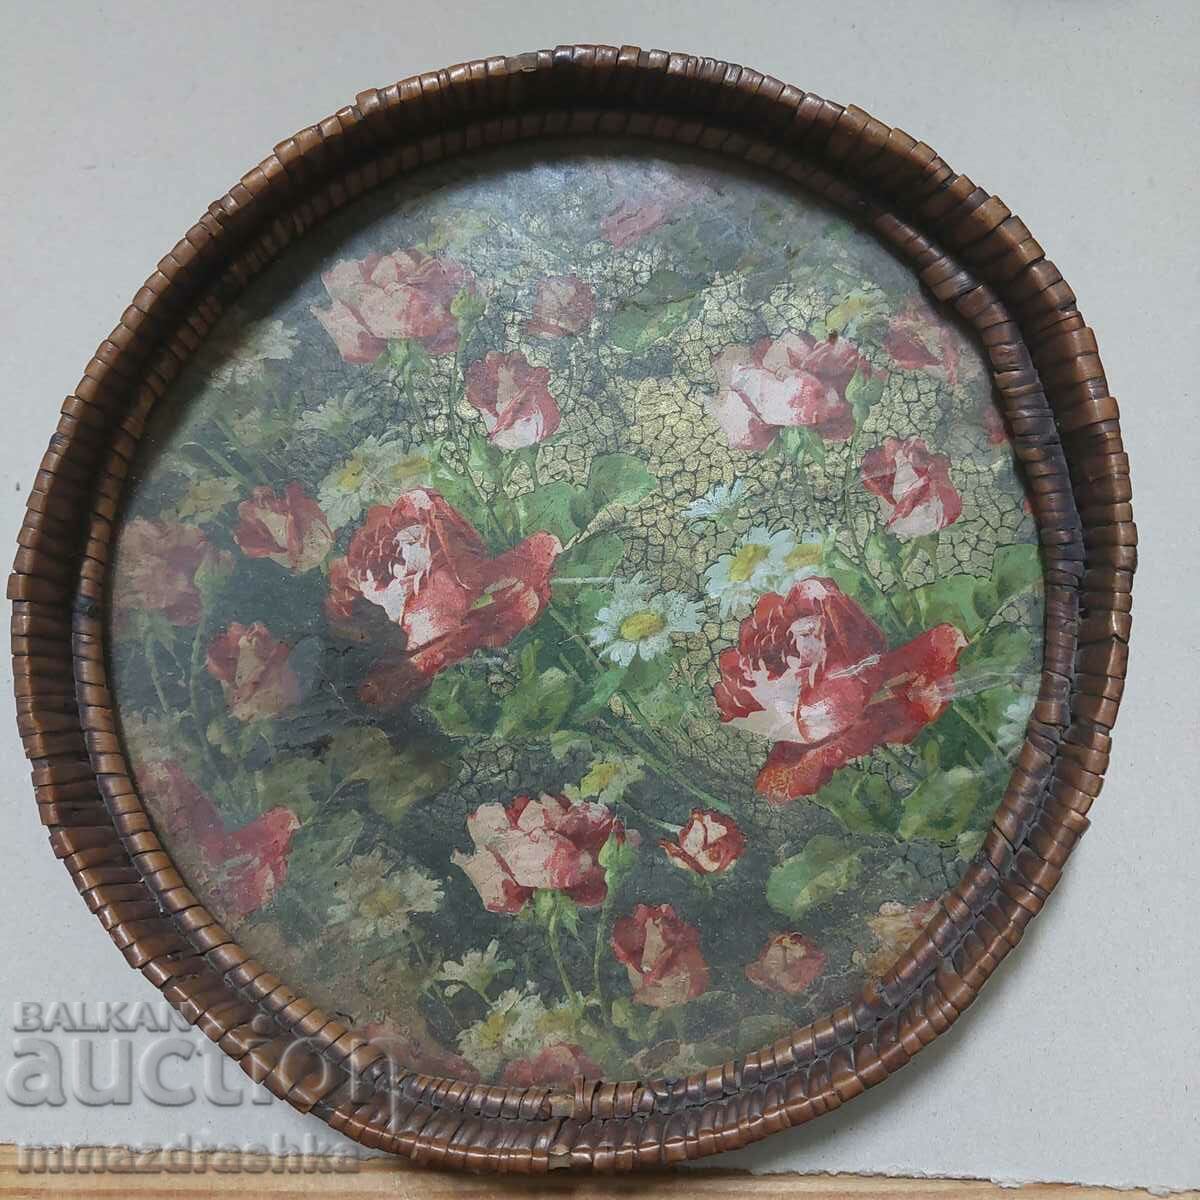 A painting in a 100-year-old panner